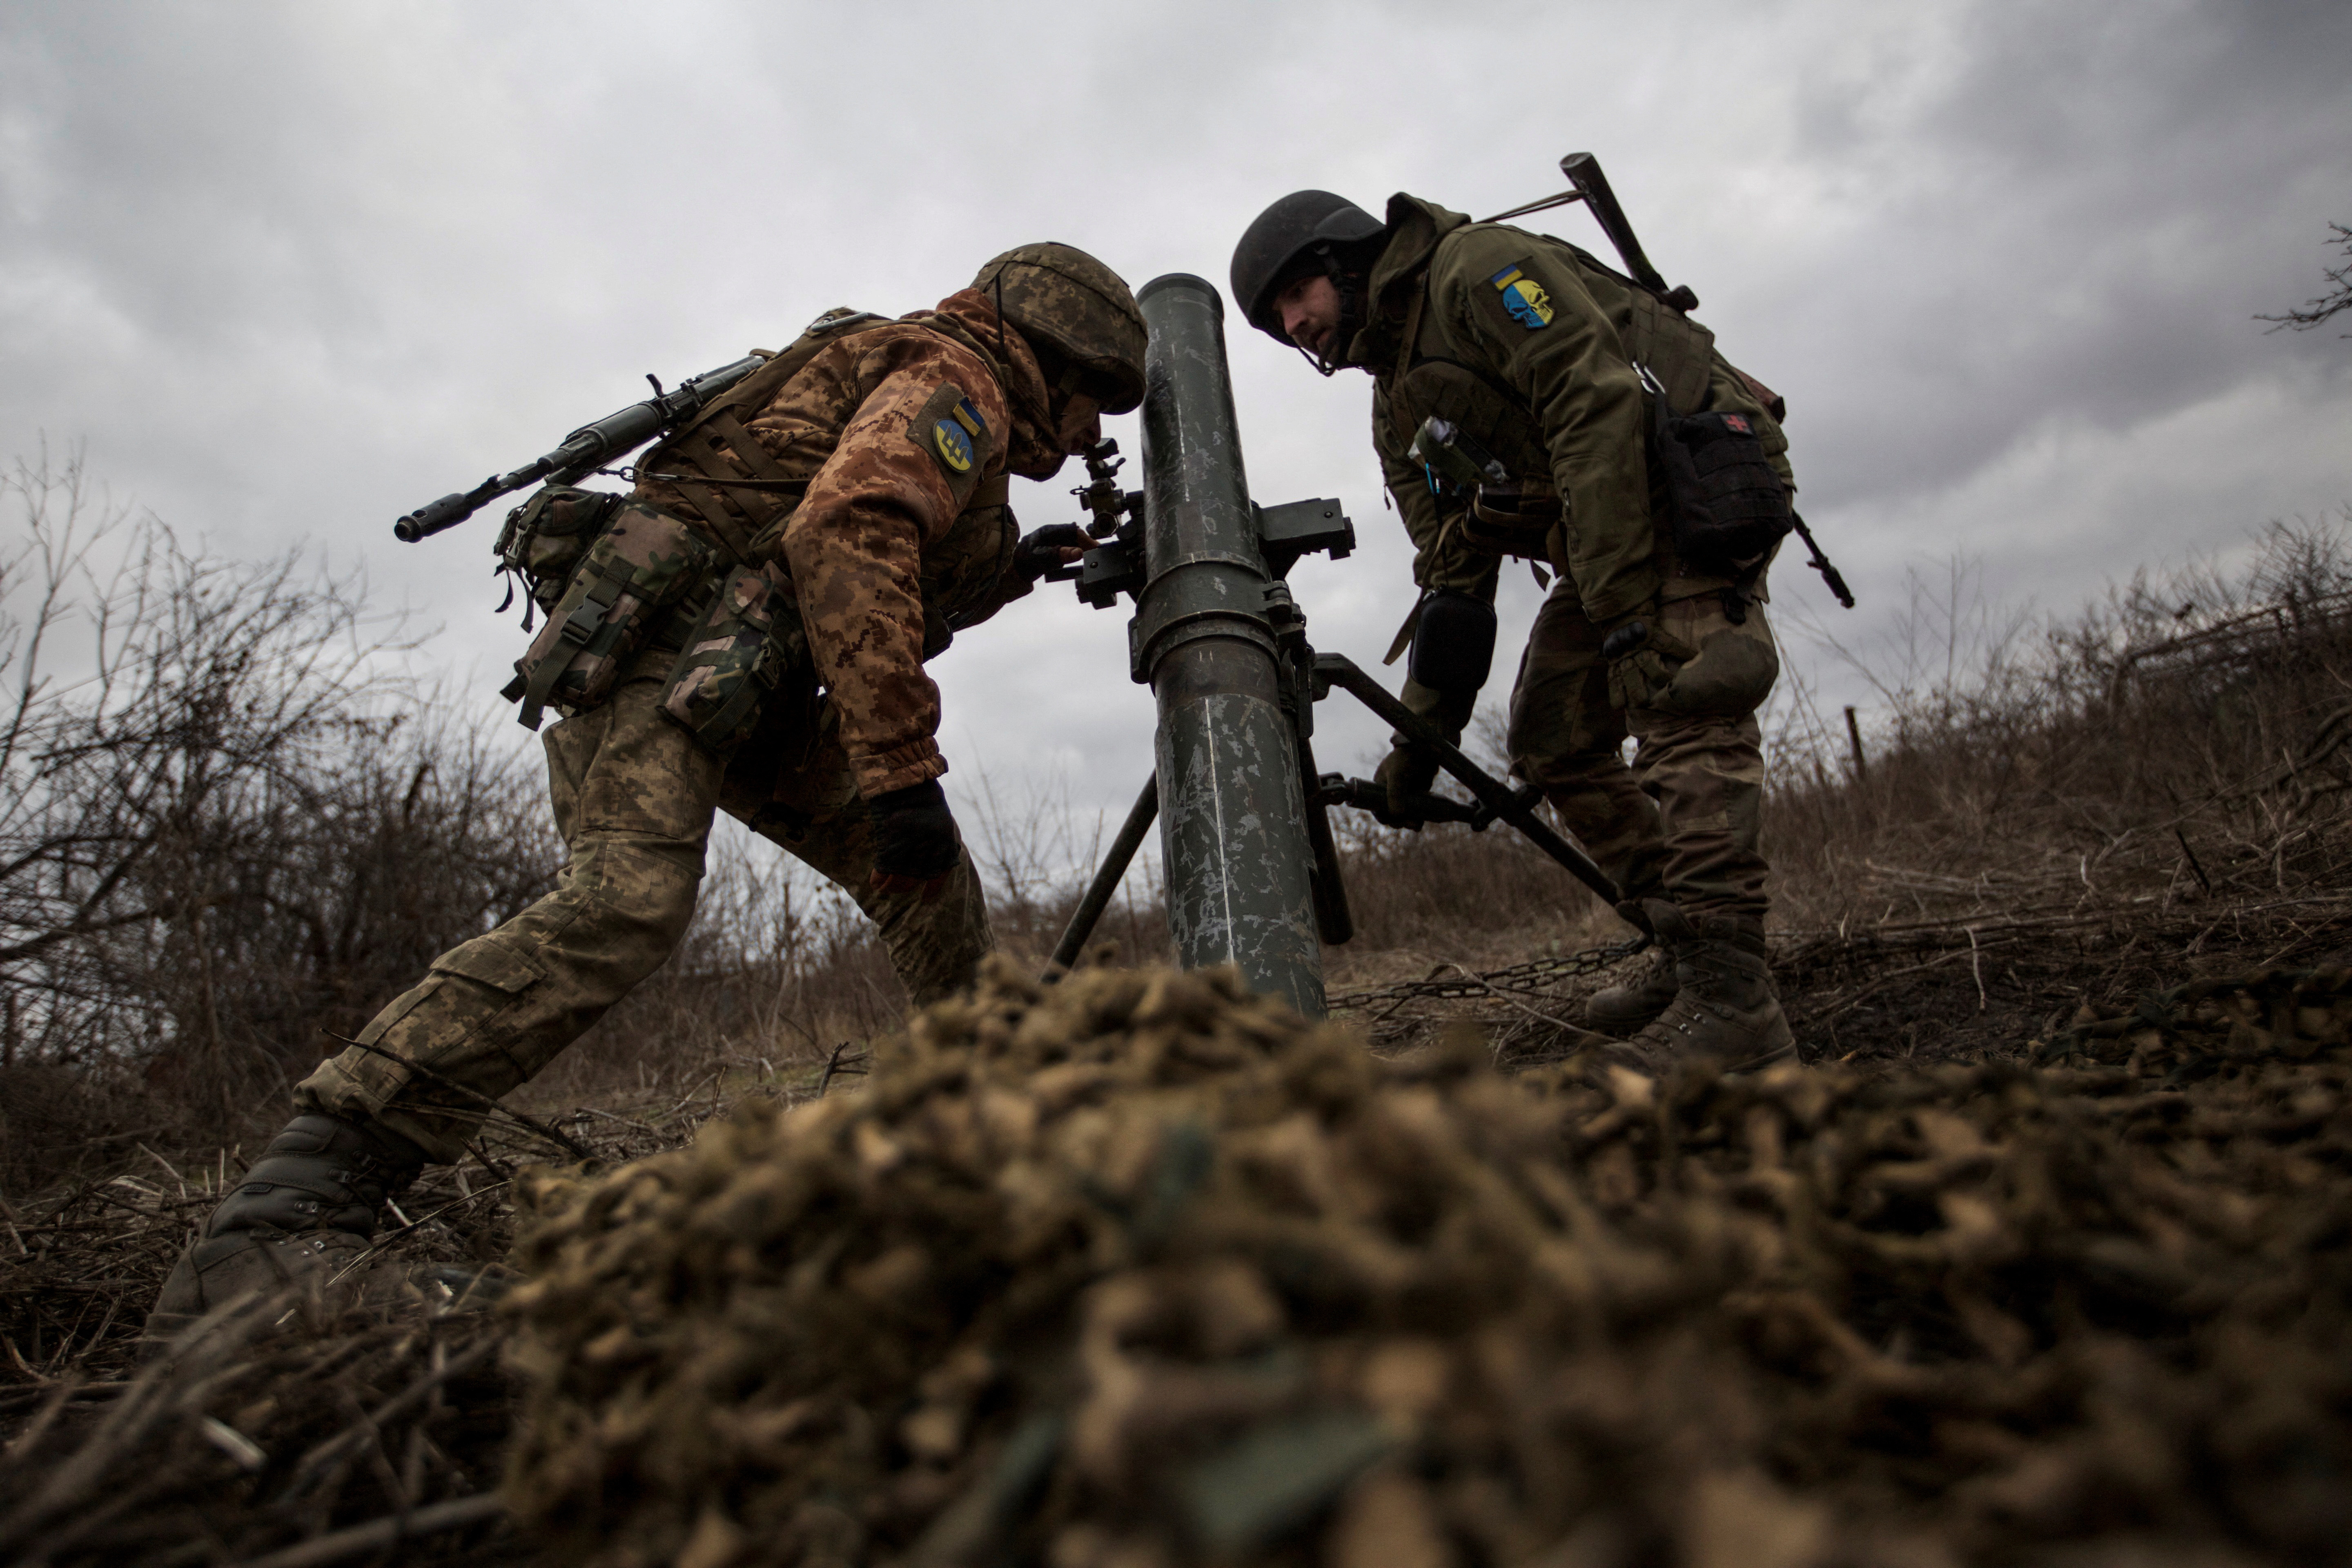 Ukrainian servicemen prepare a mortar to fire at Russian troop positions, amid Russia's attack on Ukraine, on the outskirts of Bakhmut, Donetsk region, Ukraine on December 30, 2022 (Reuters)